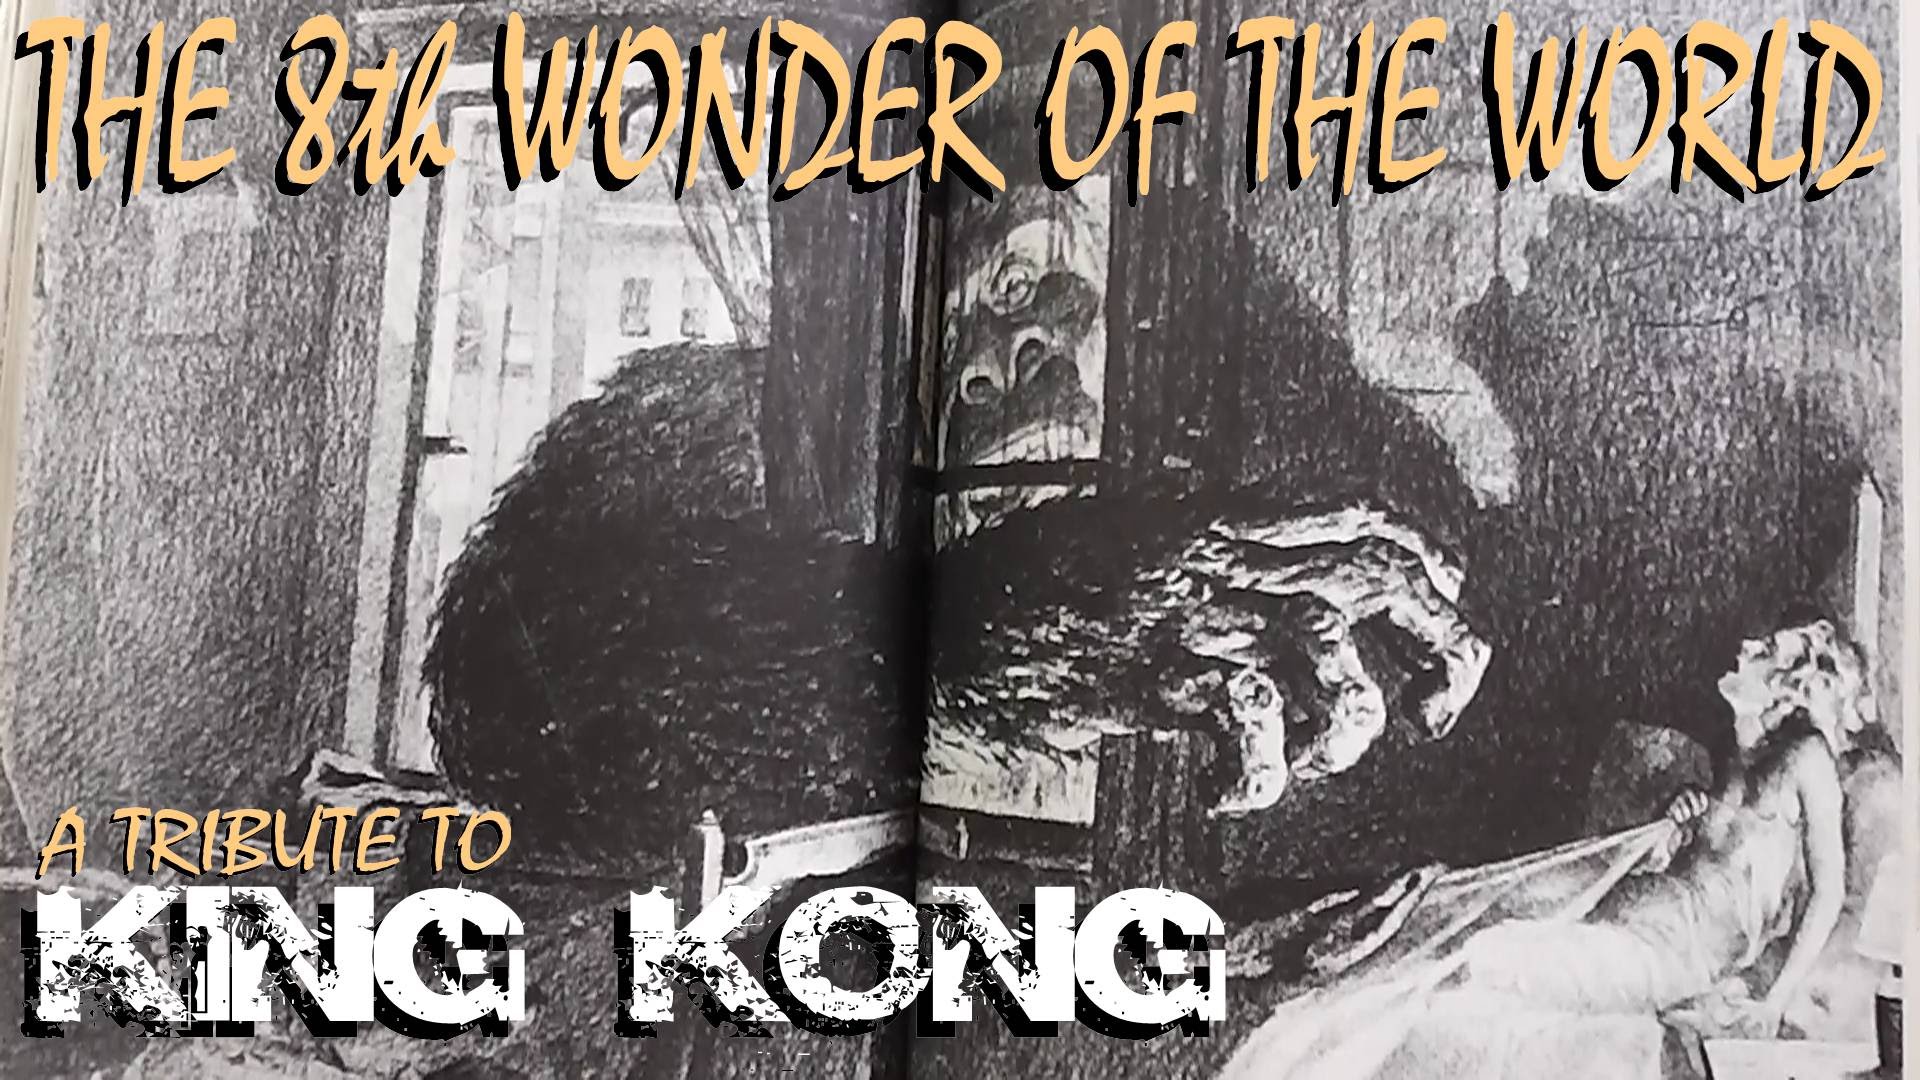 The 8th Wonder Of The World A Tribute To King Kong - YouTube